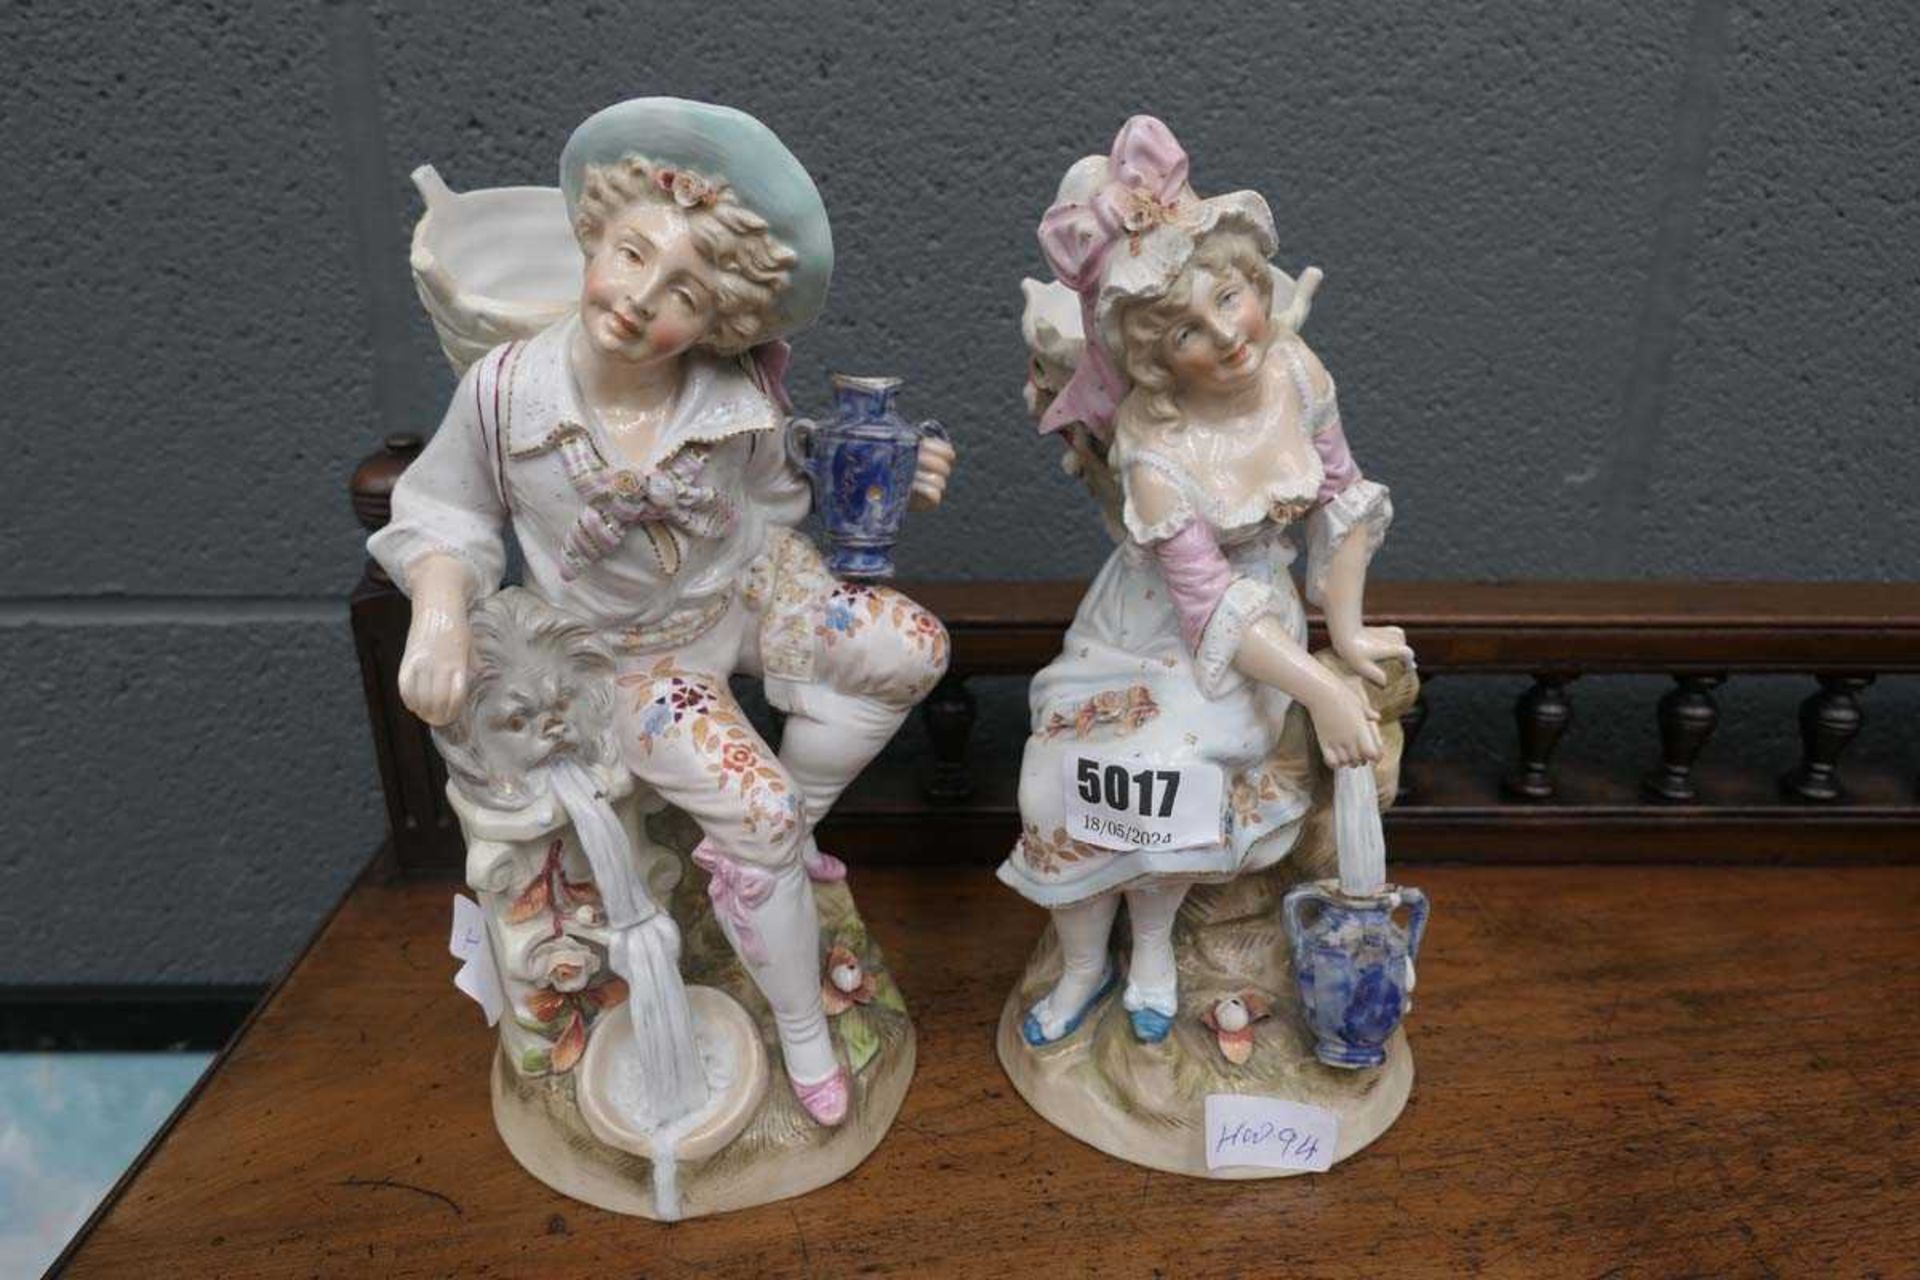 Two ceramic figures of boy and girl with baskets